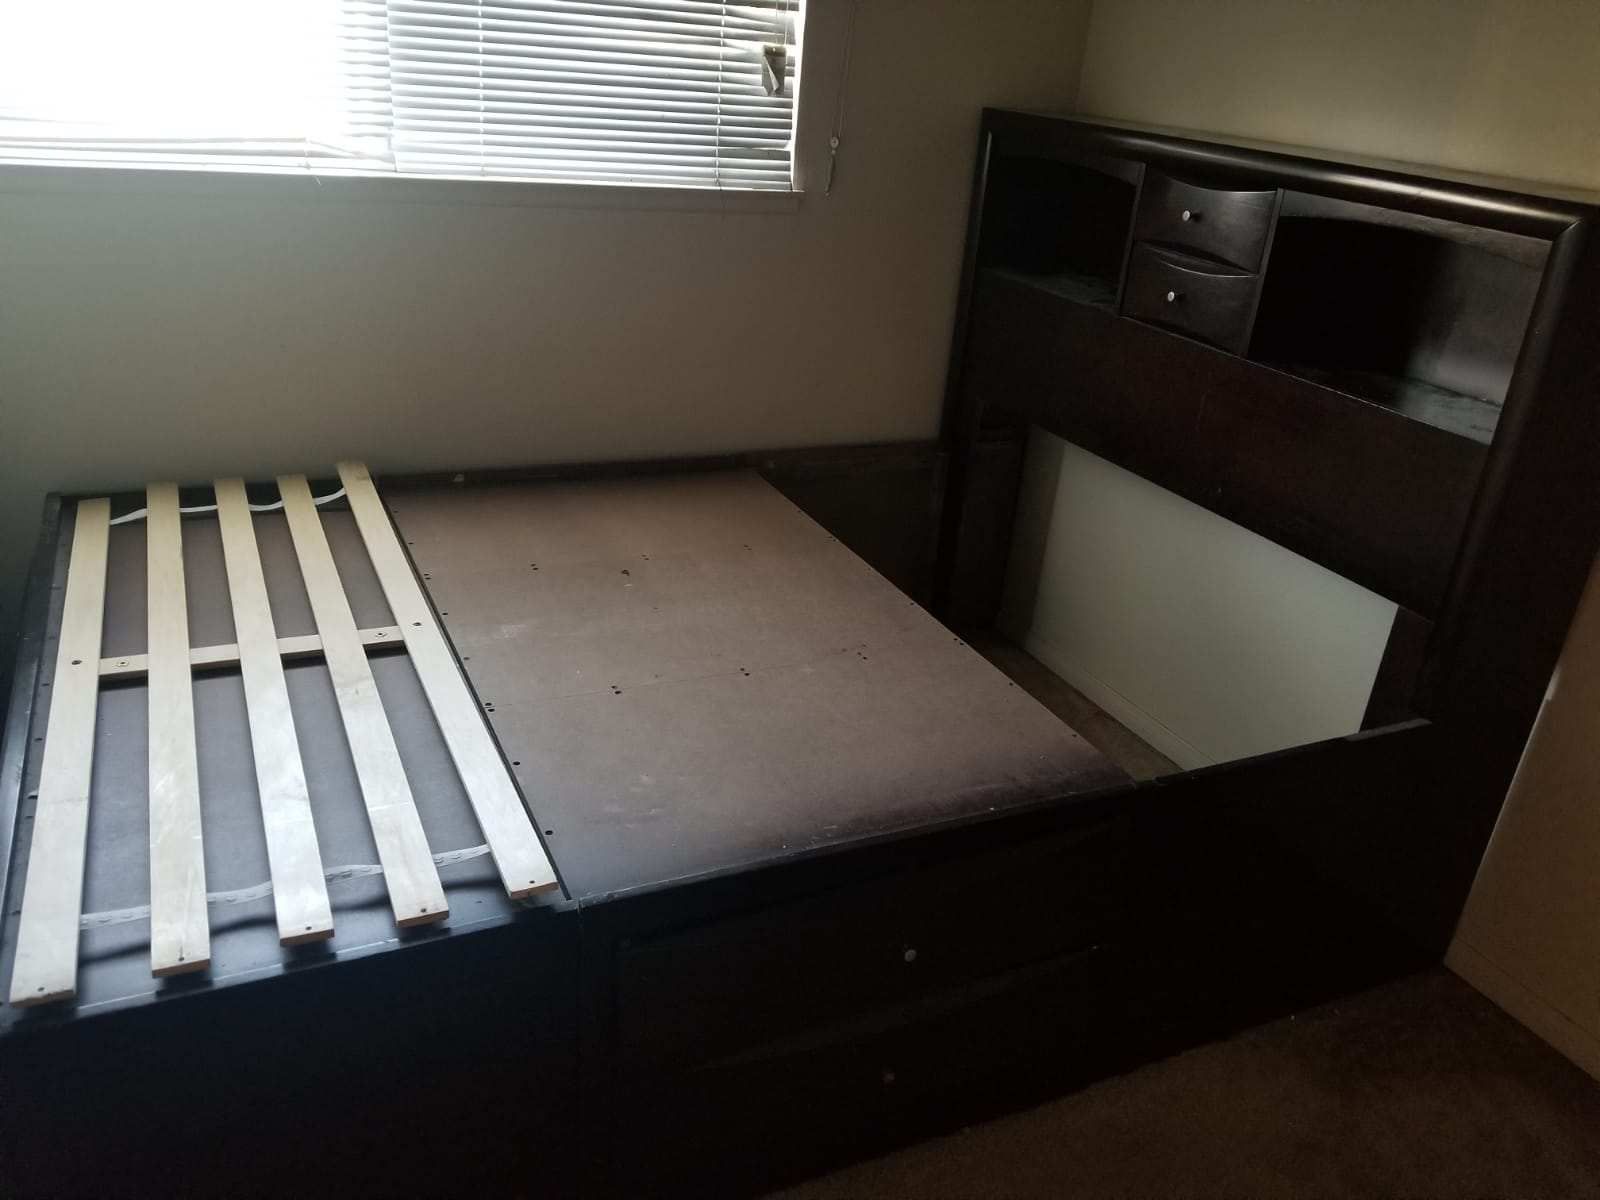 Free bed frame !! Must pick up & disassemble! Need gone ASAP